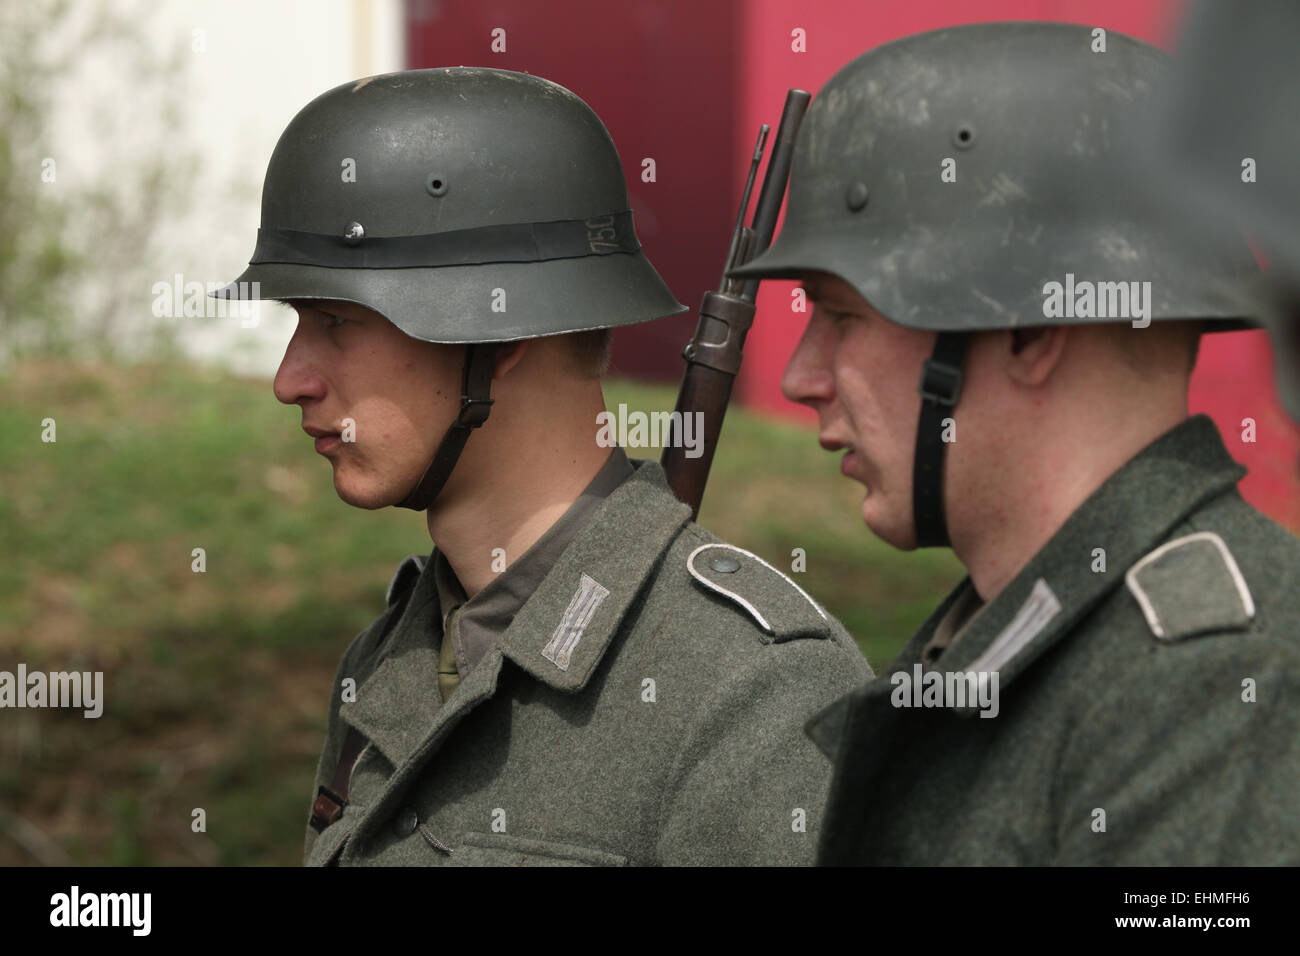 Re-enactors dressed as German Nazi soldiers prepare to stage the Battle at Orechov (1945) near Brno, Czech Republic. The Battle at Orechov in April 1945 was the biggest tank battle in the last days of the World War II in South Moravia, Czechoslovakia. Stock Photo